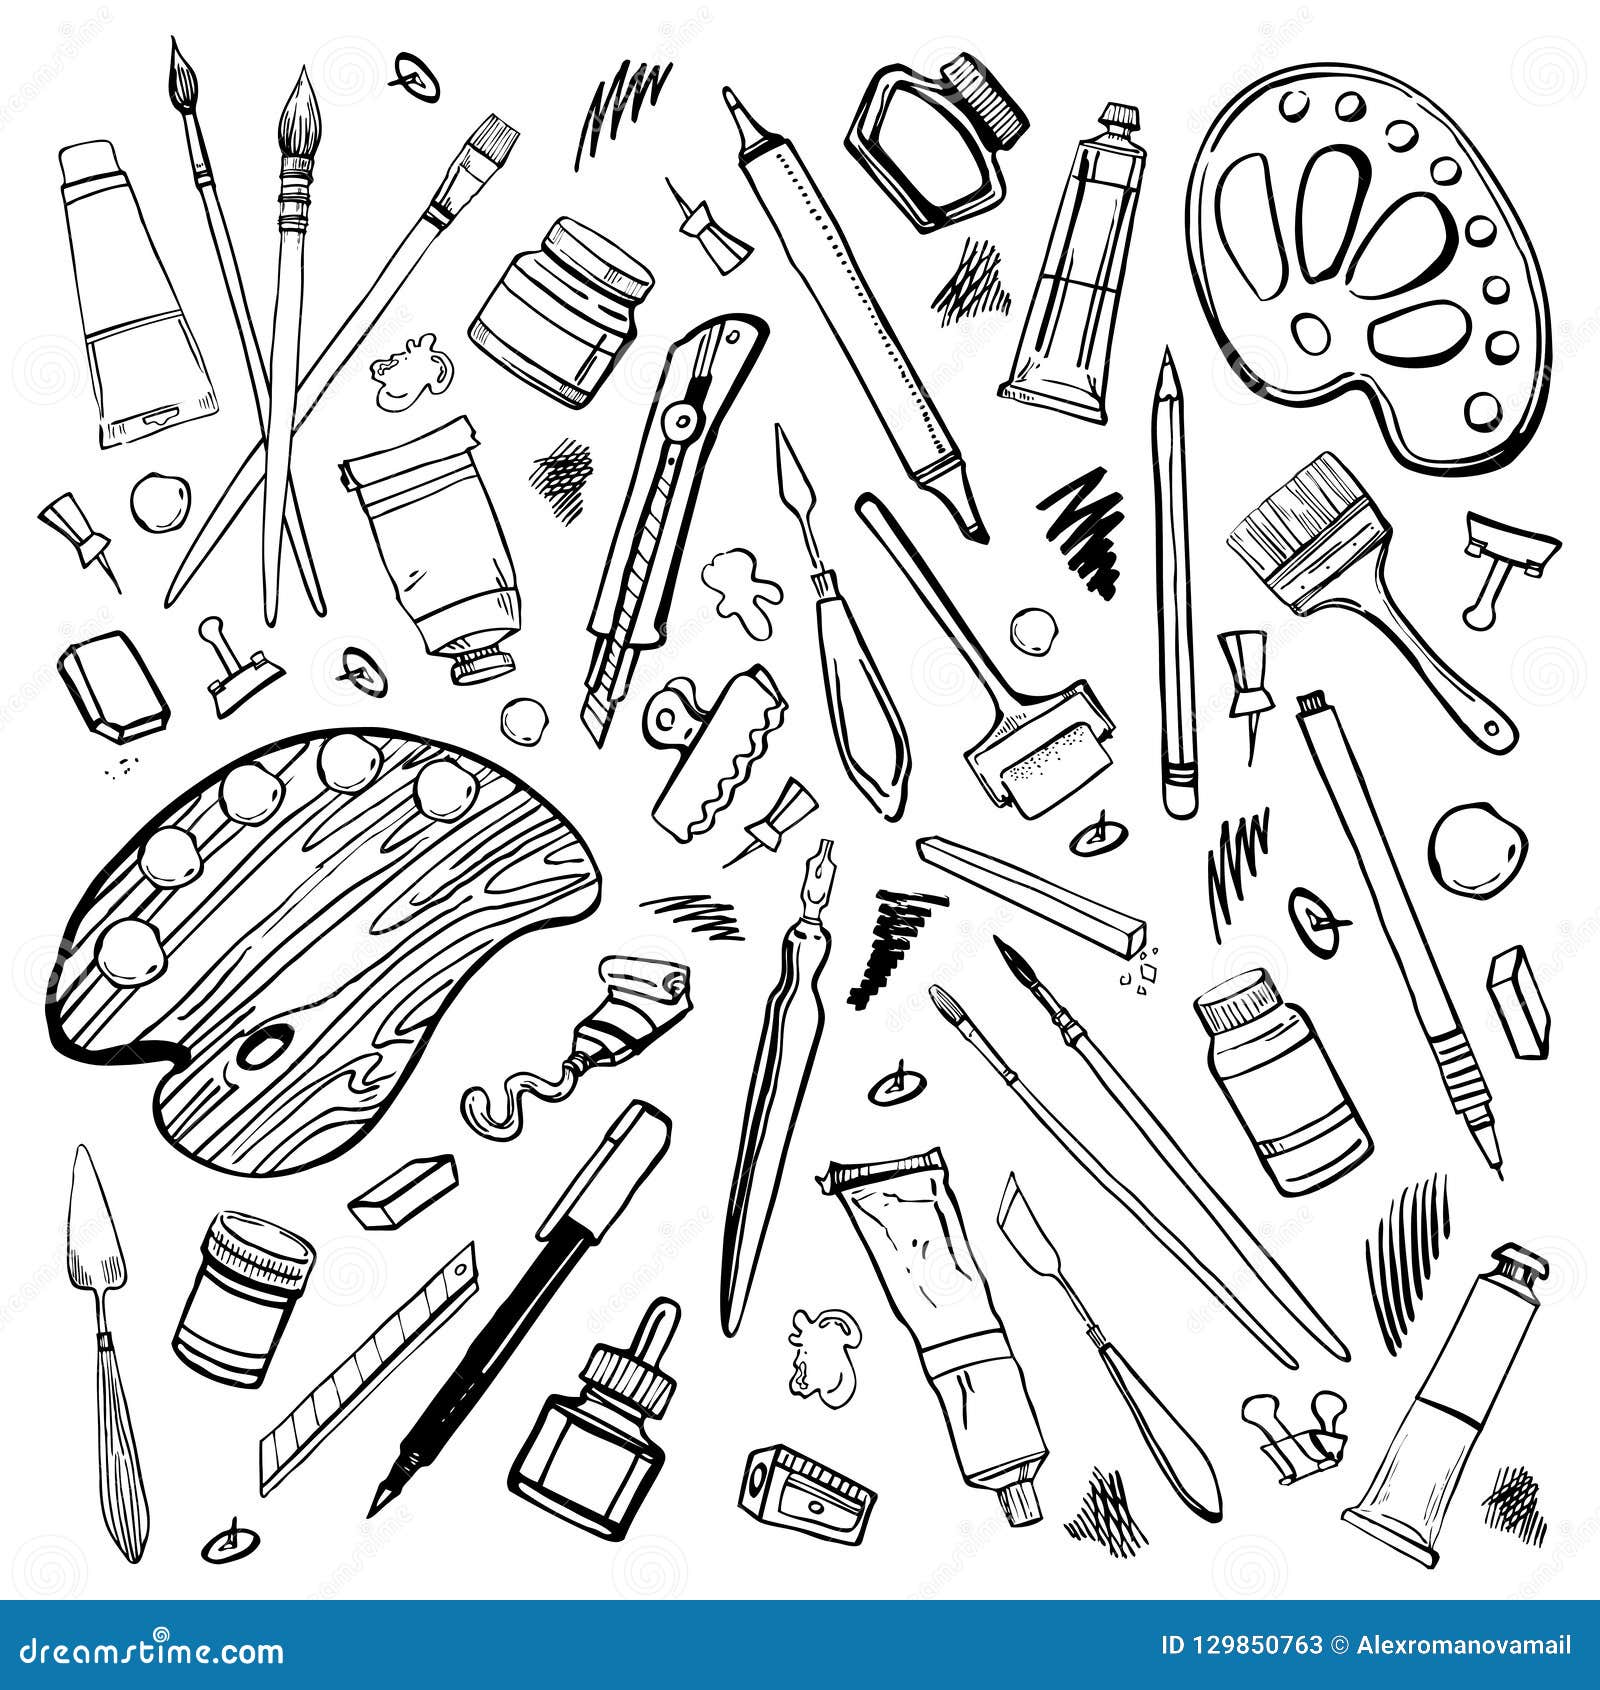 Seamless vector background of household items stylized as hand-drawing.  Stock Vector